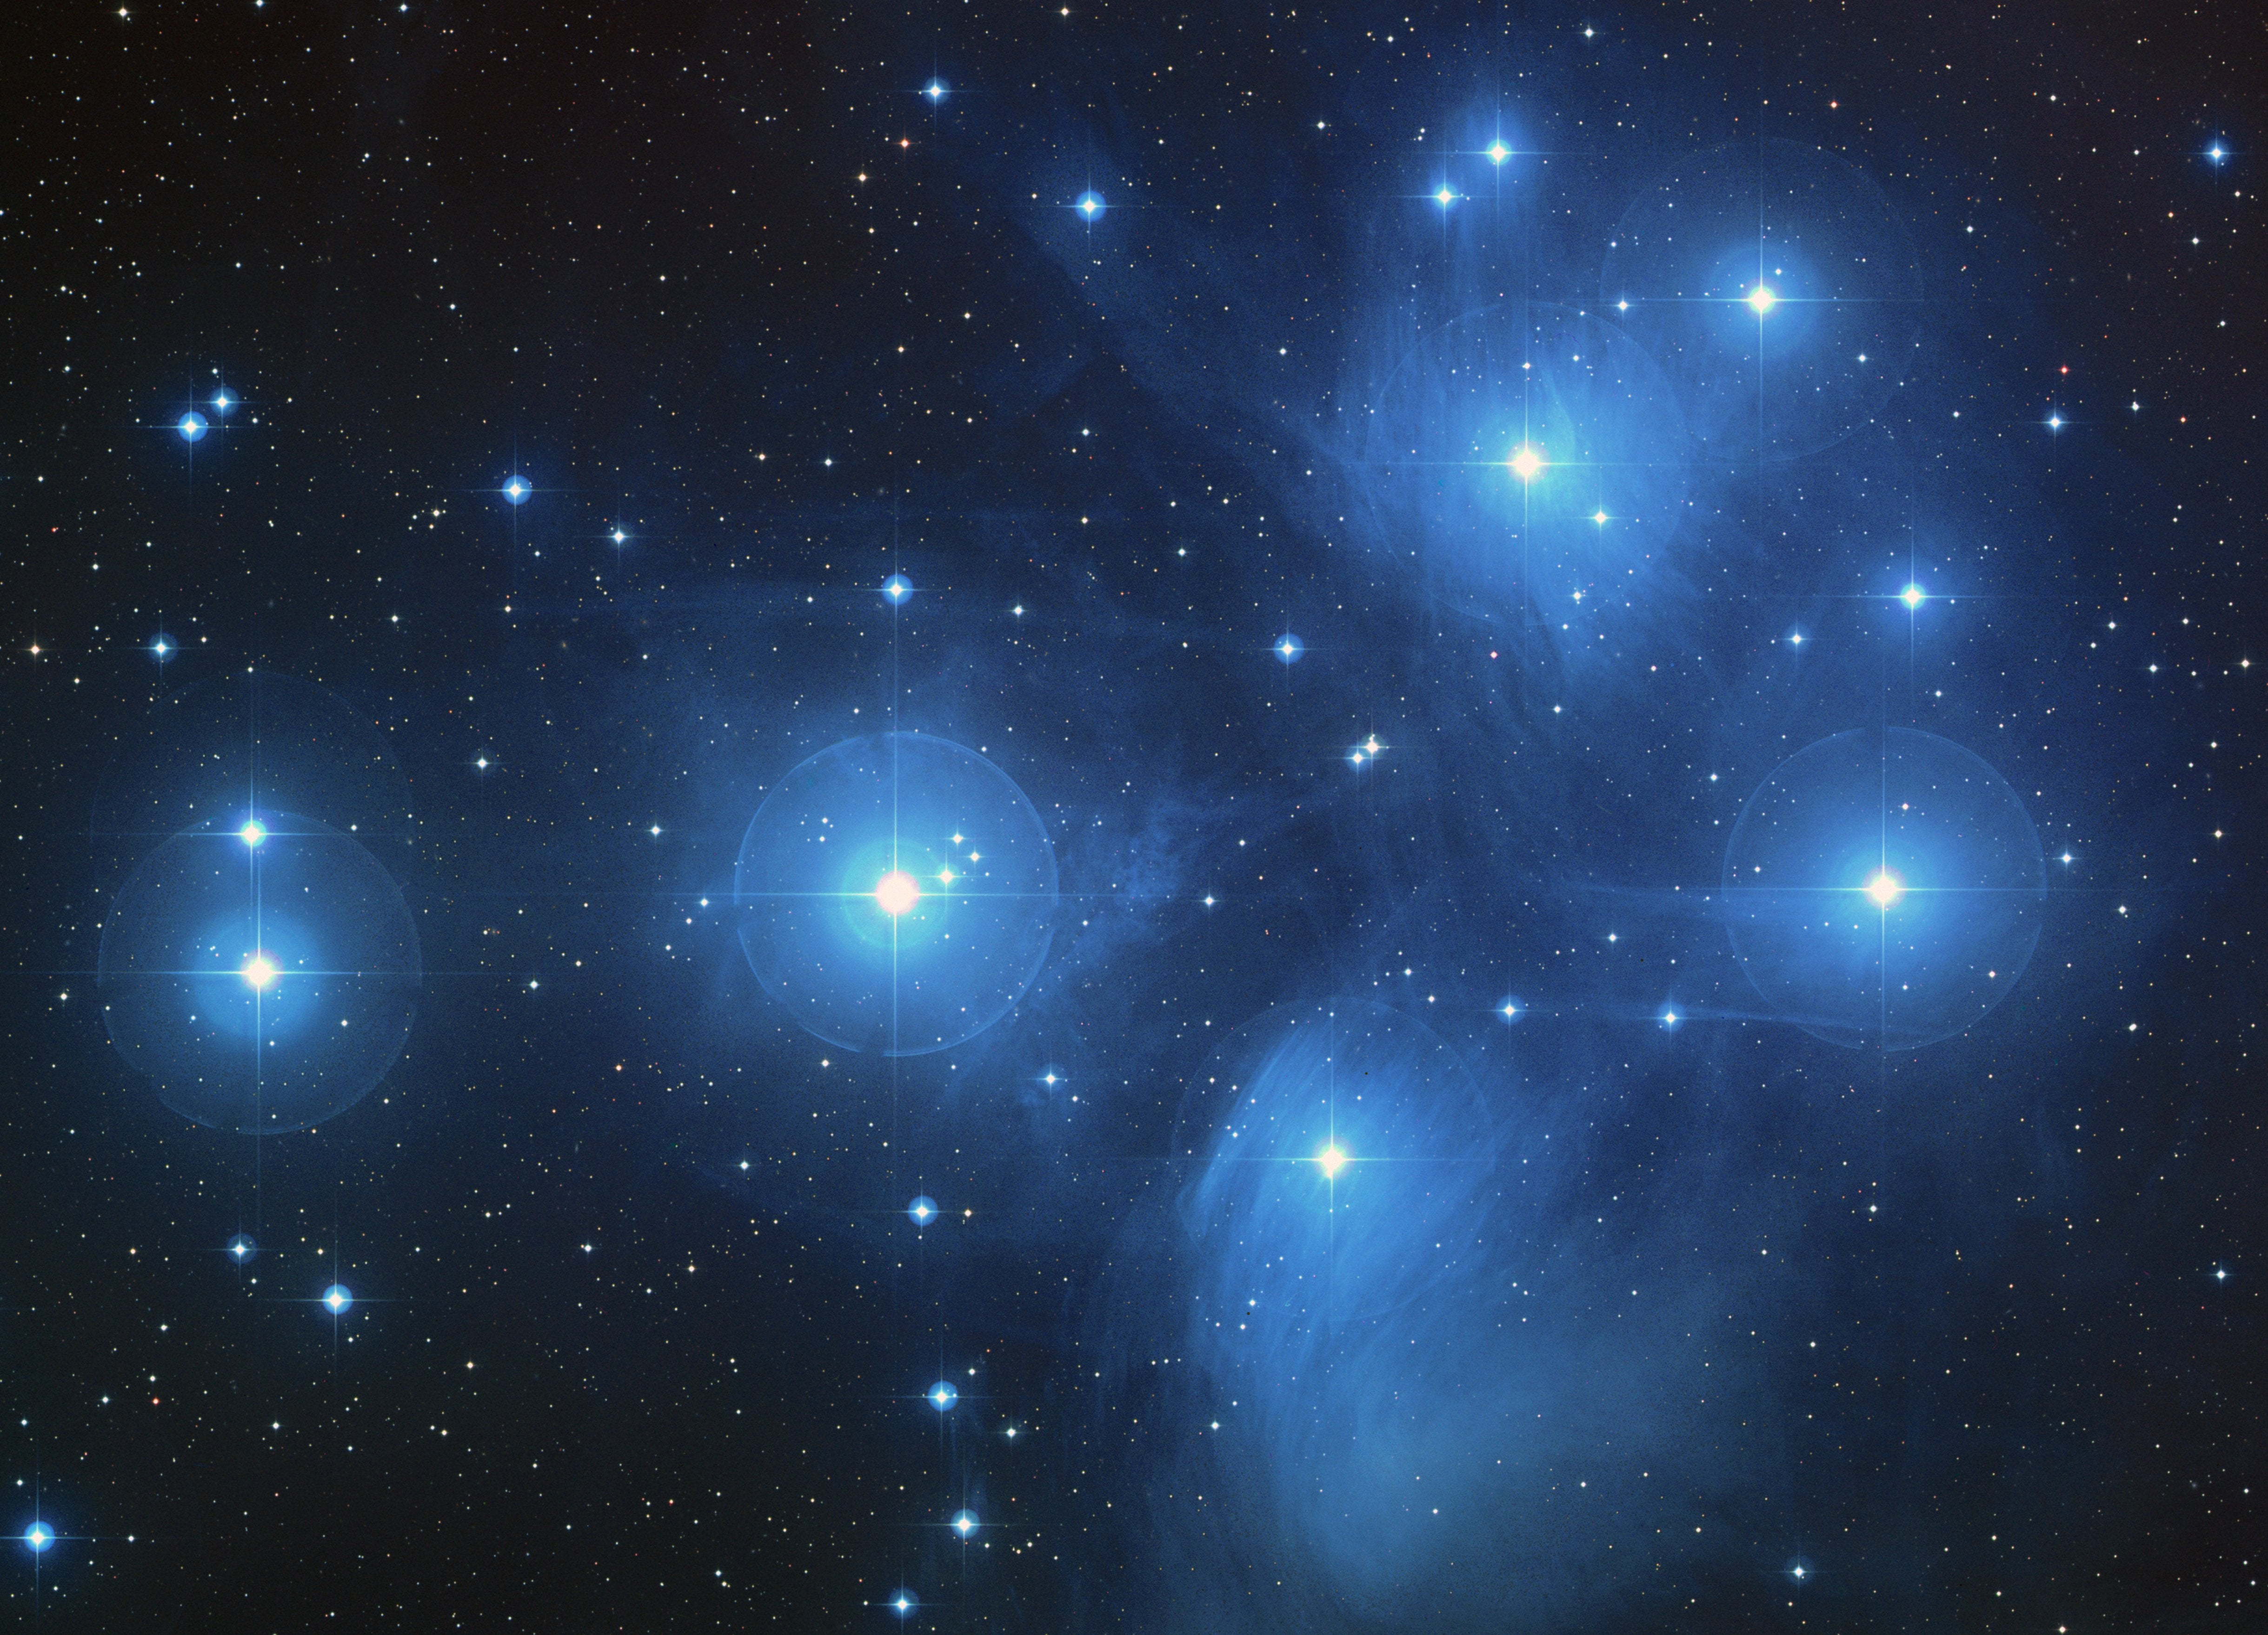 It’s called the Seven Sisters – but in reality there are hundreds of stars in the Pleiades